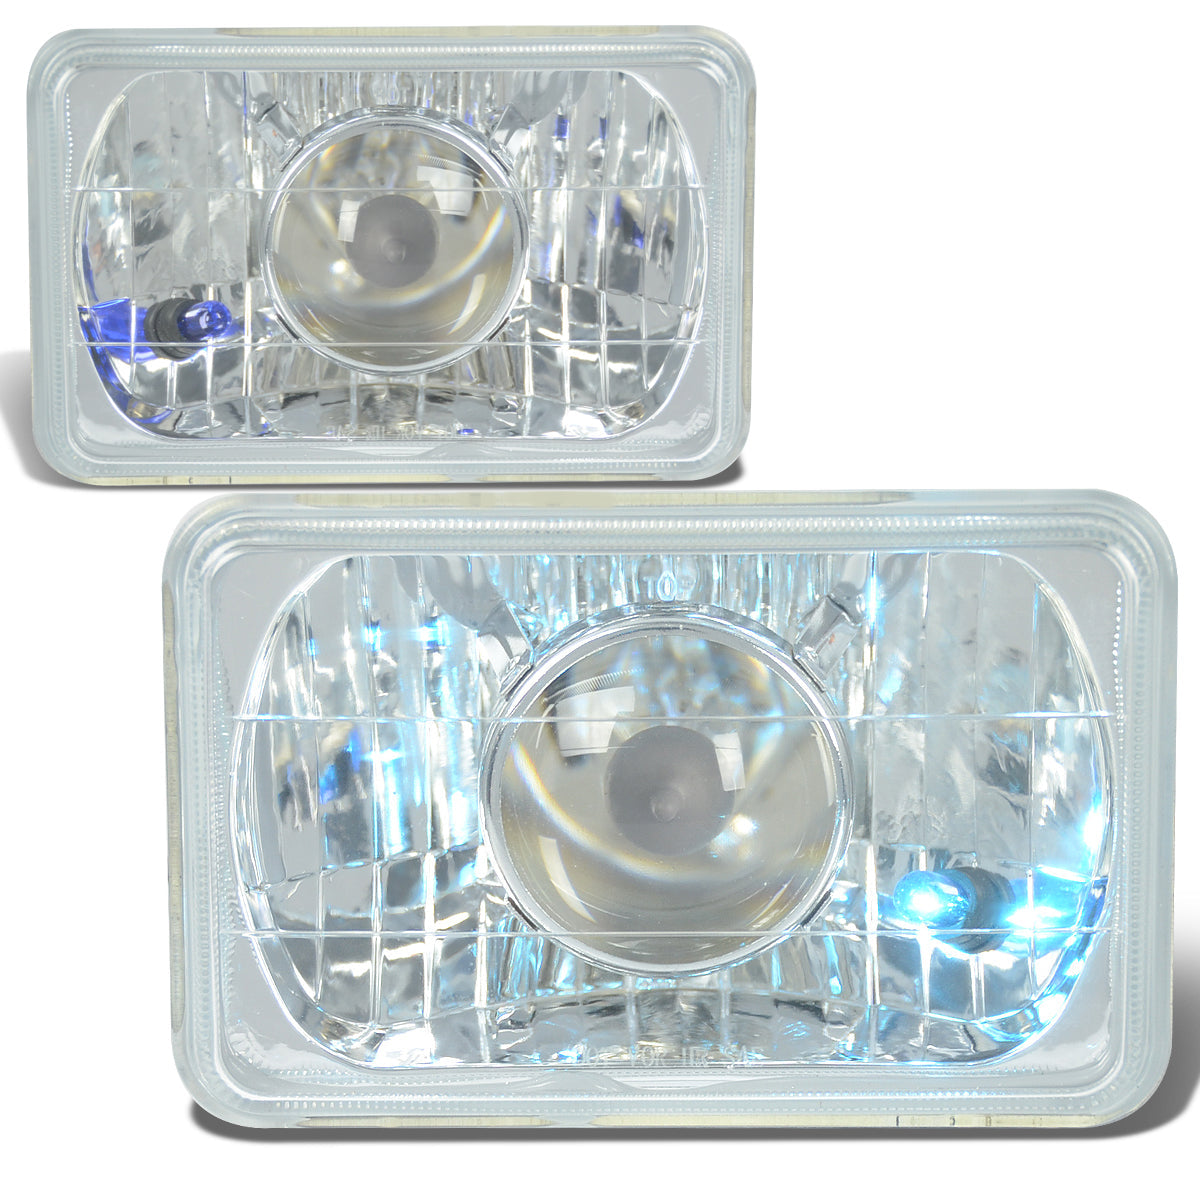 4x6 in. Square Projector Headlights